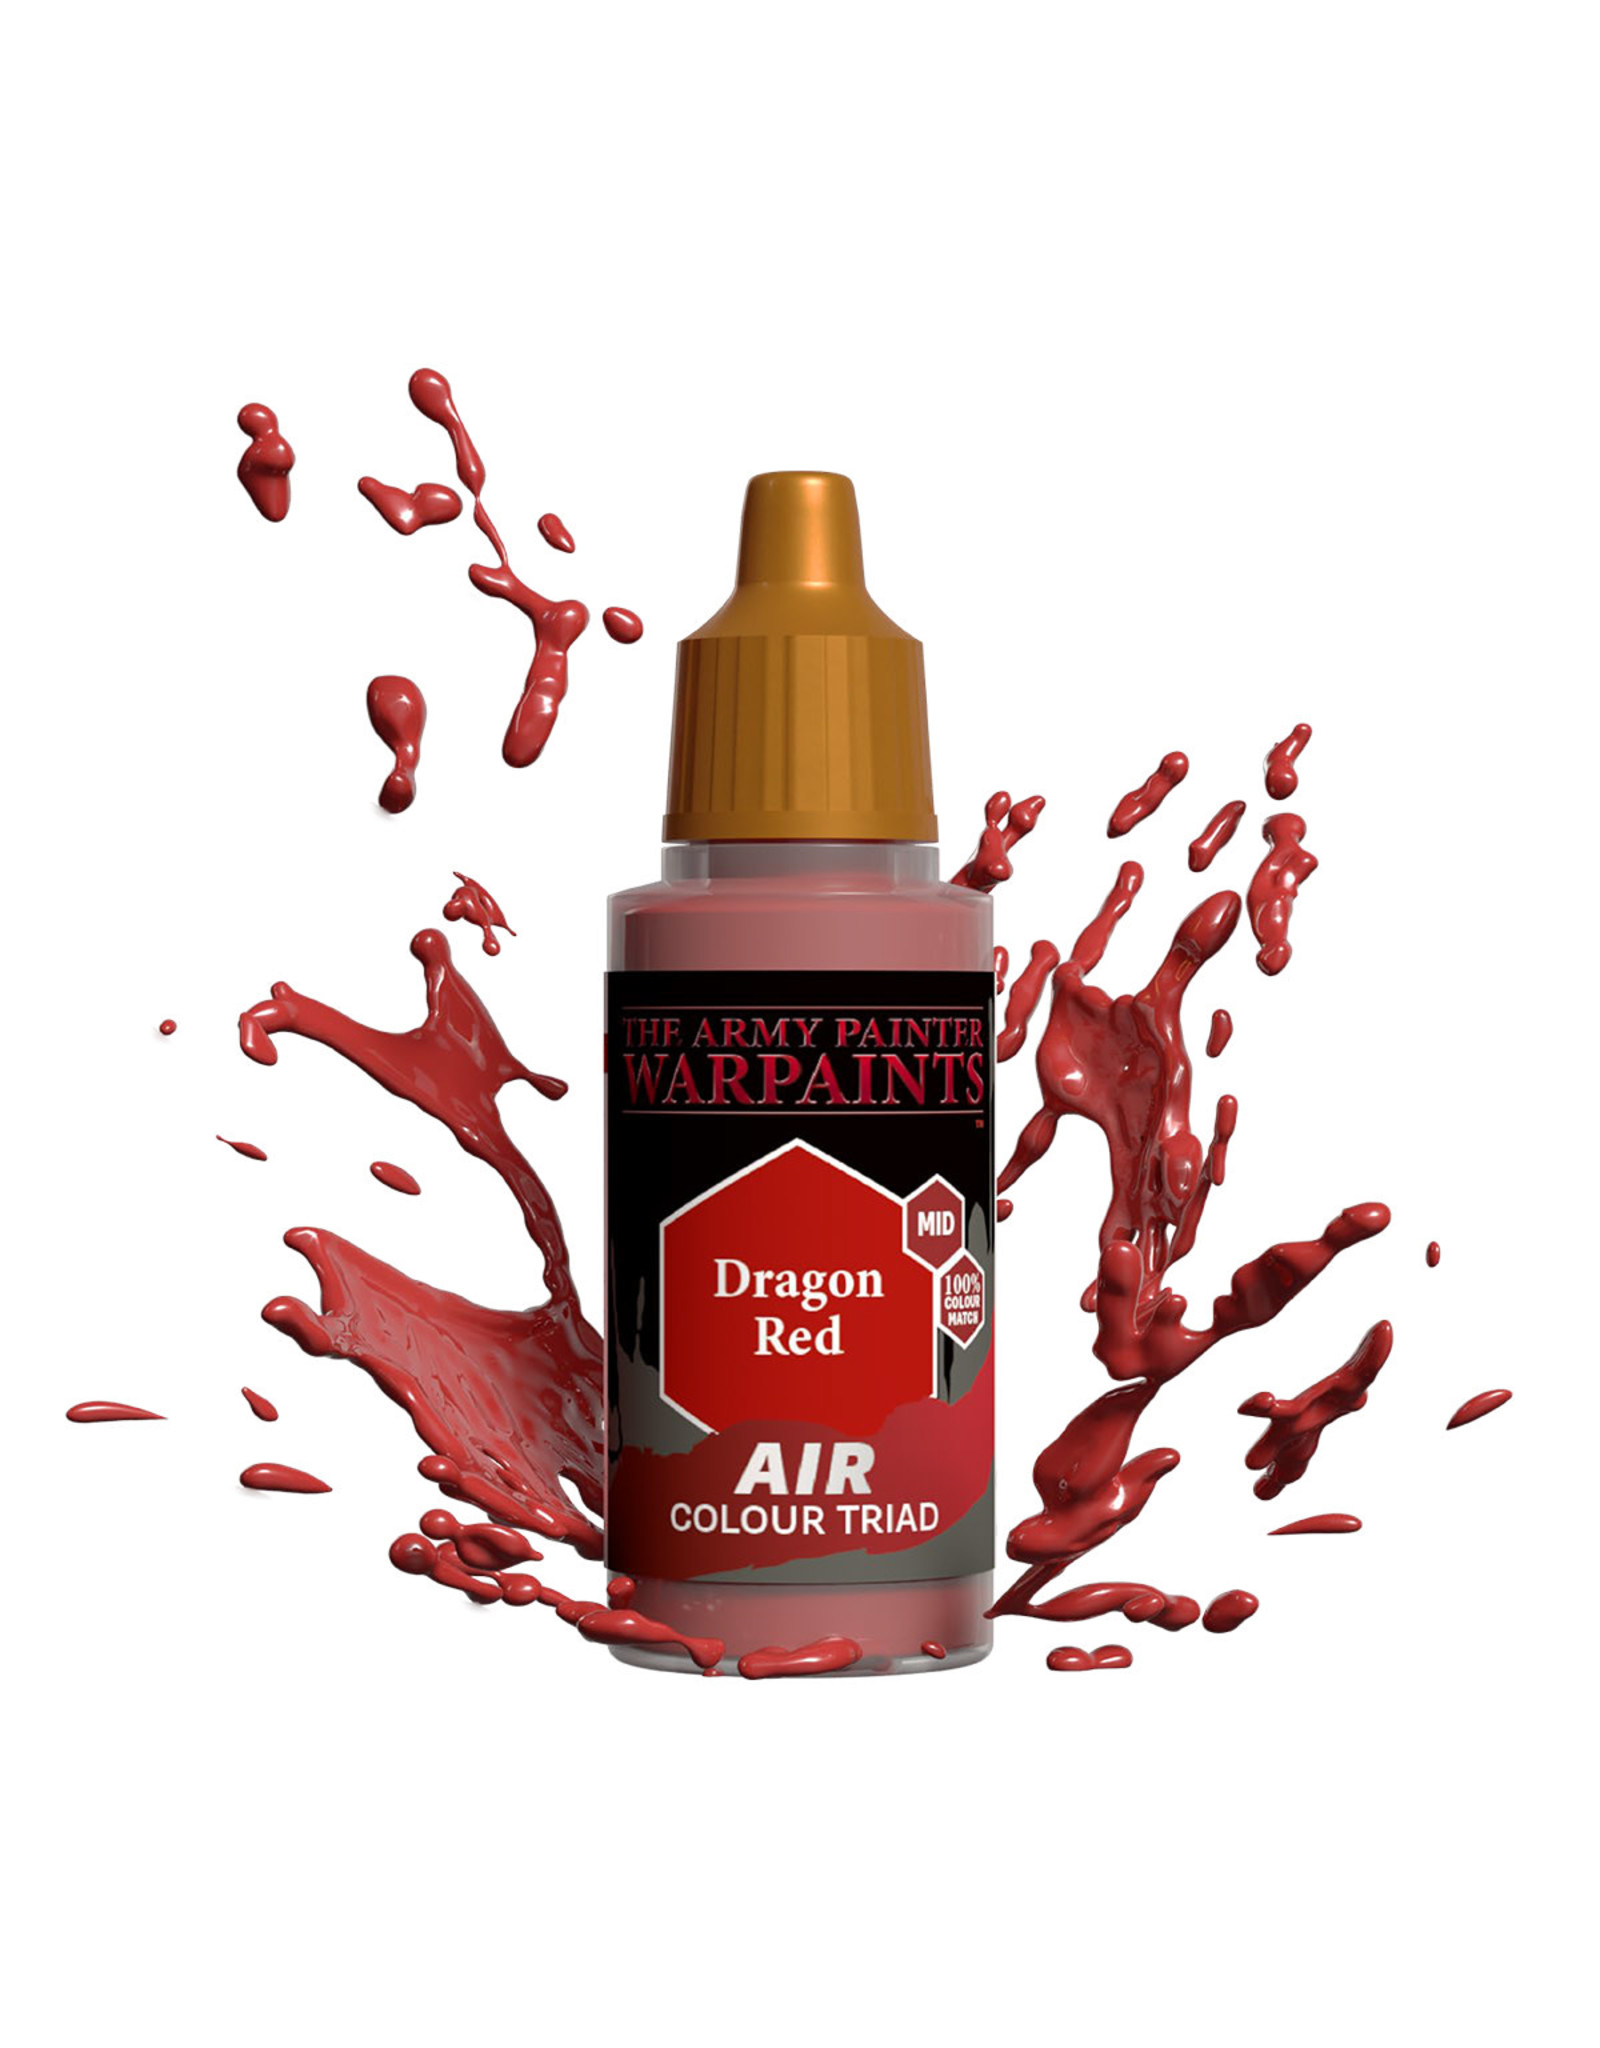 The Army Painter The Army Painter Warpaints Air: Dragon Red